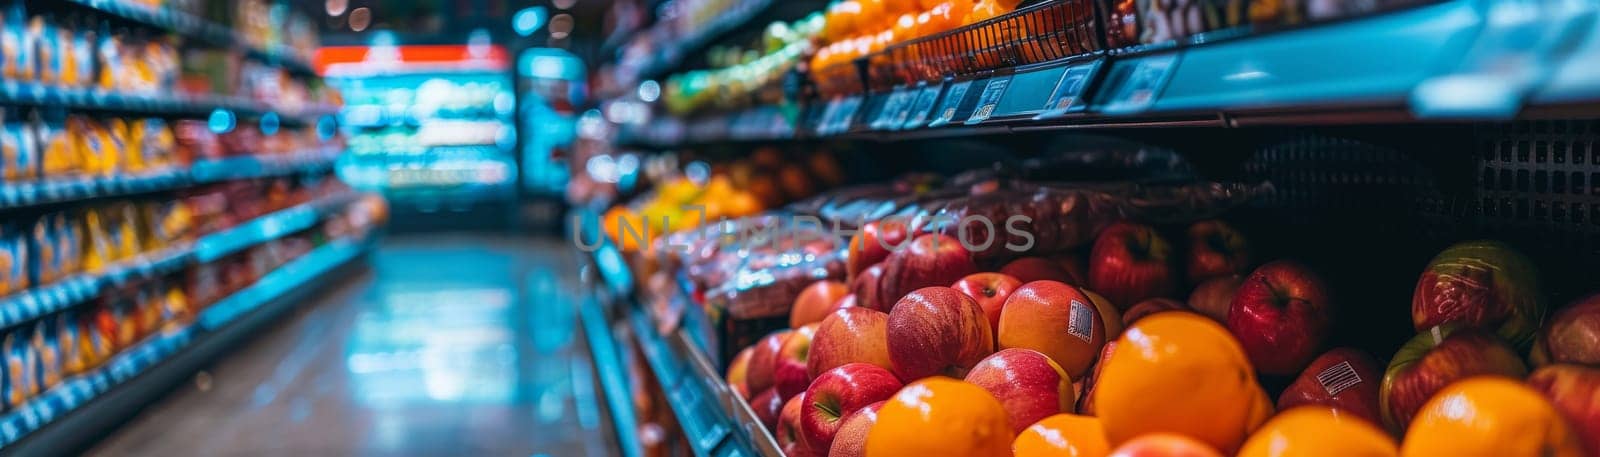 A grocery store aisle with a variety of fruits and vegetables by itchaznong